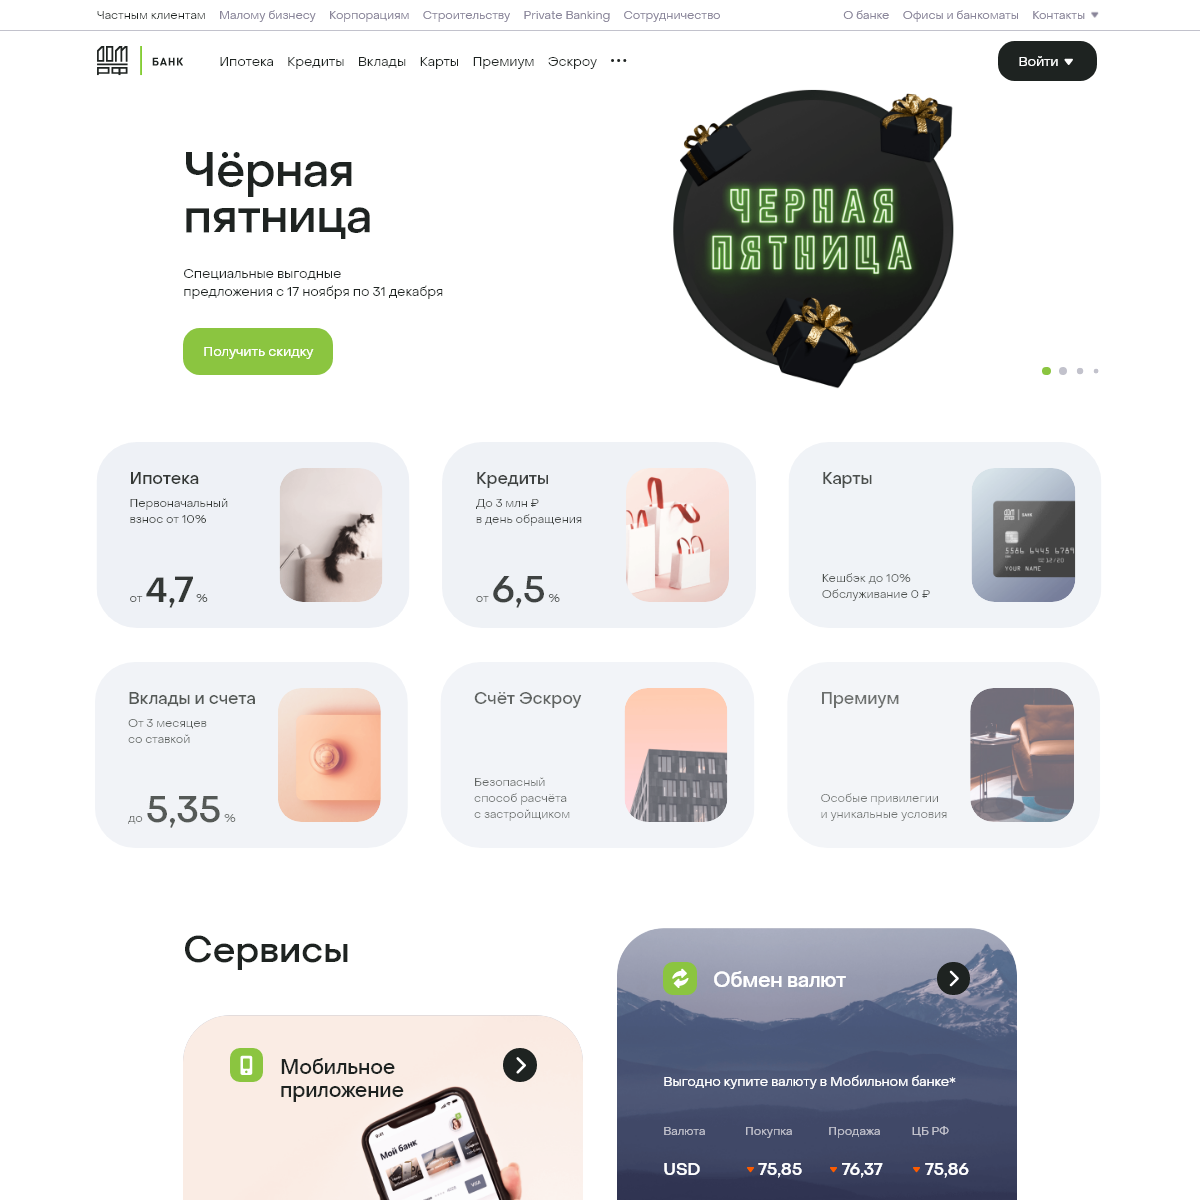 A complete backup of domrfbank.ru